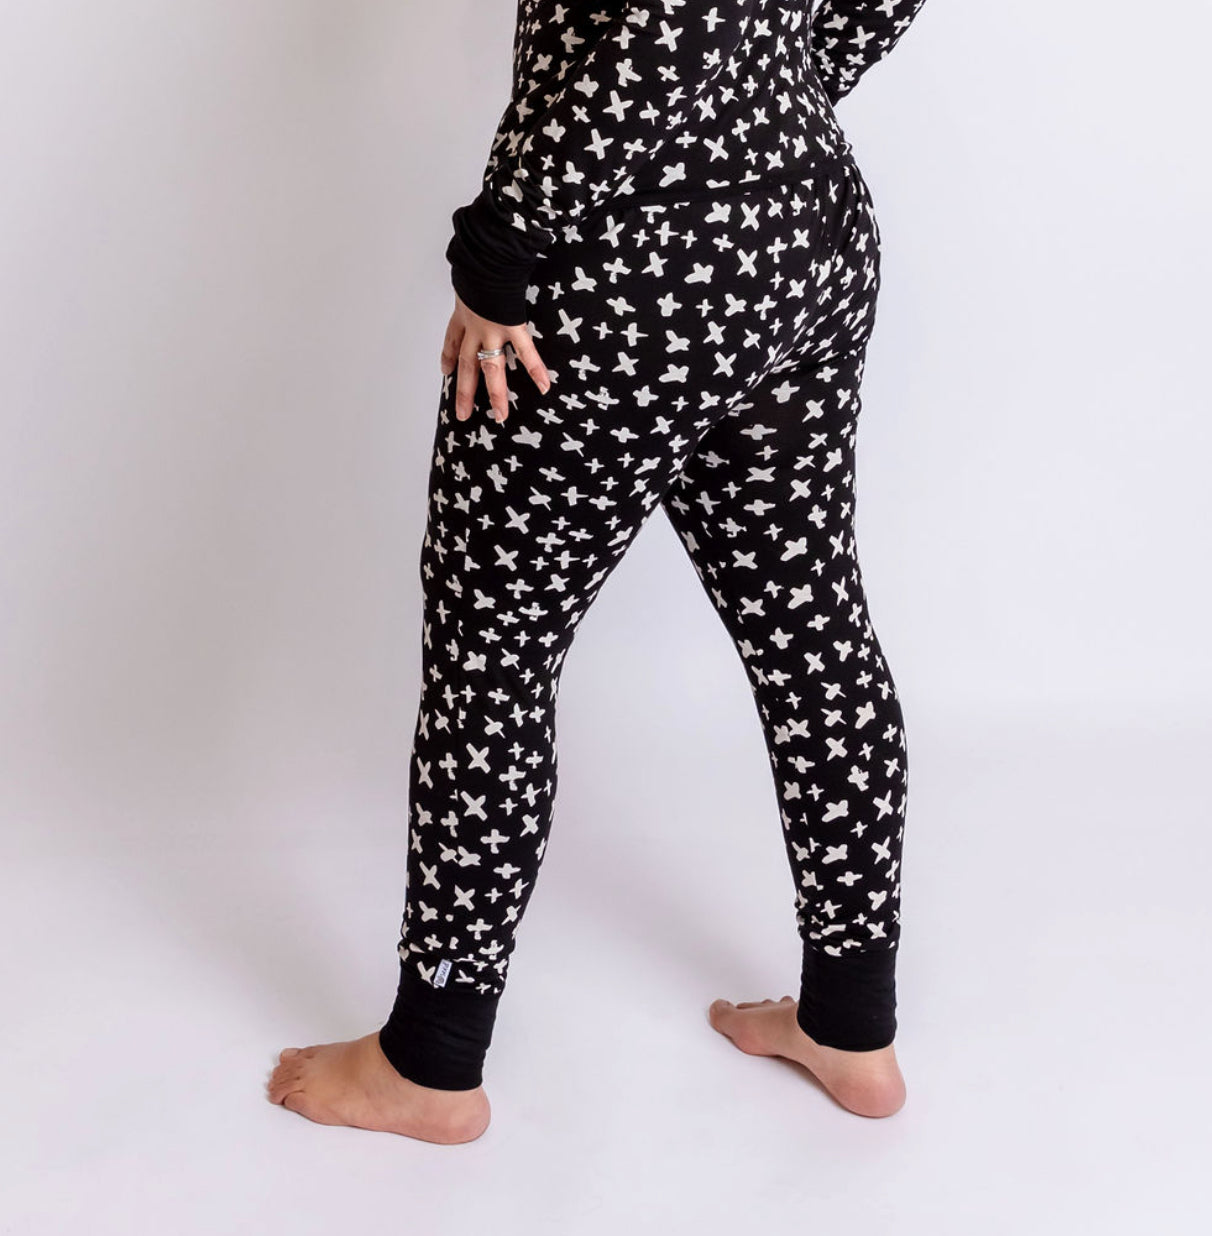 X Marks the Spot Black At Your Leisure Snap Down Adult Romper- 3X-5X